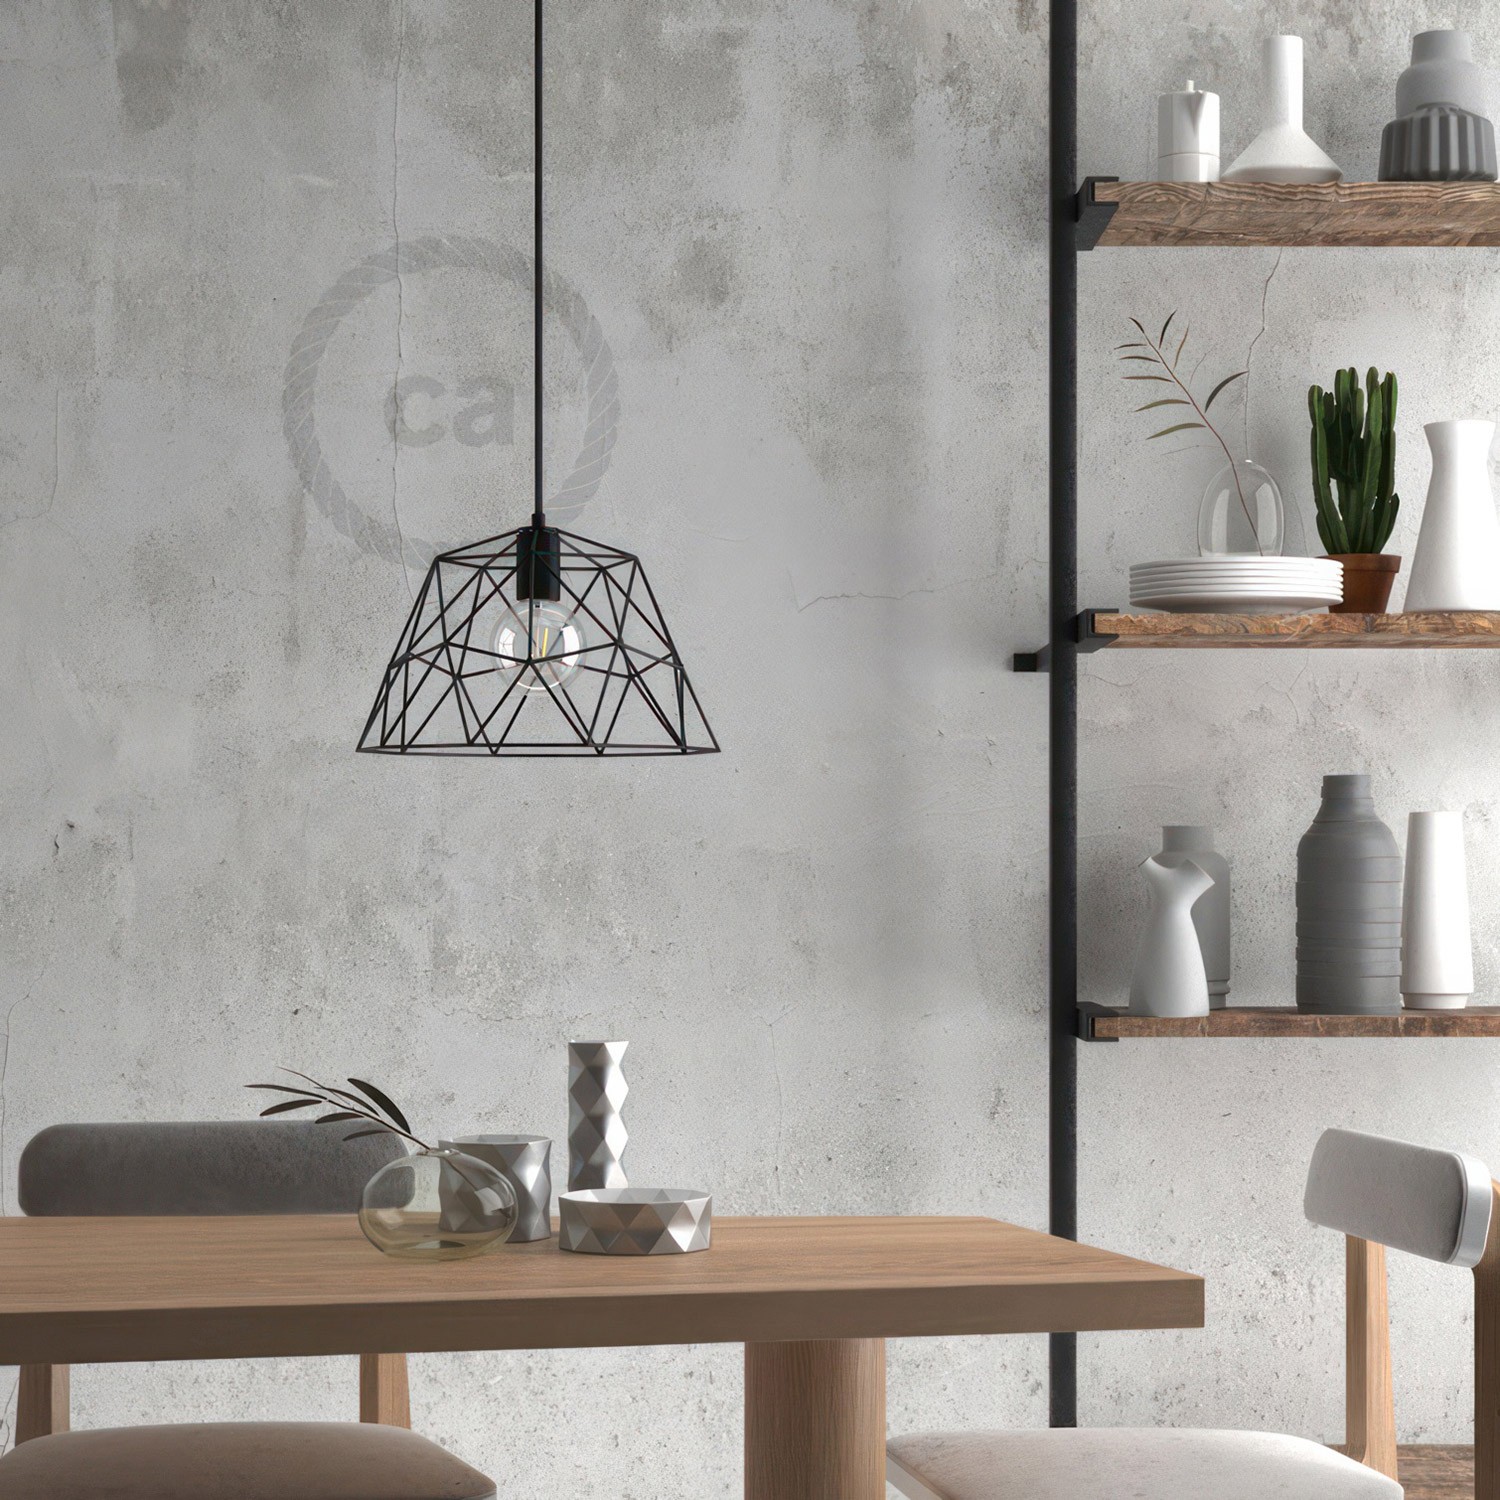 Pendant lamp with textile cable, Dome lampshade and metal details - Made in Italy